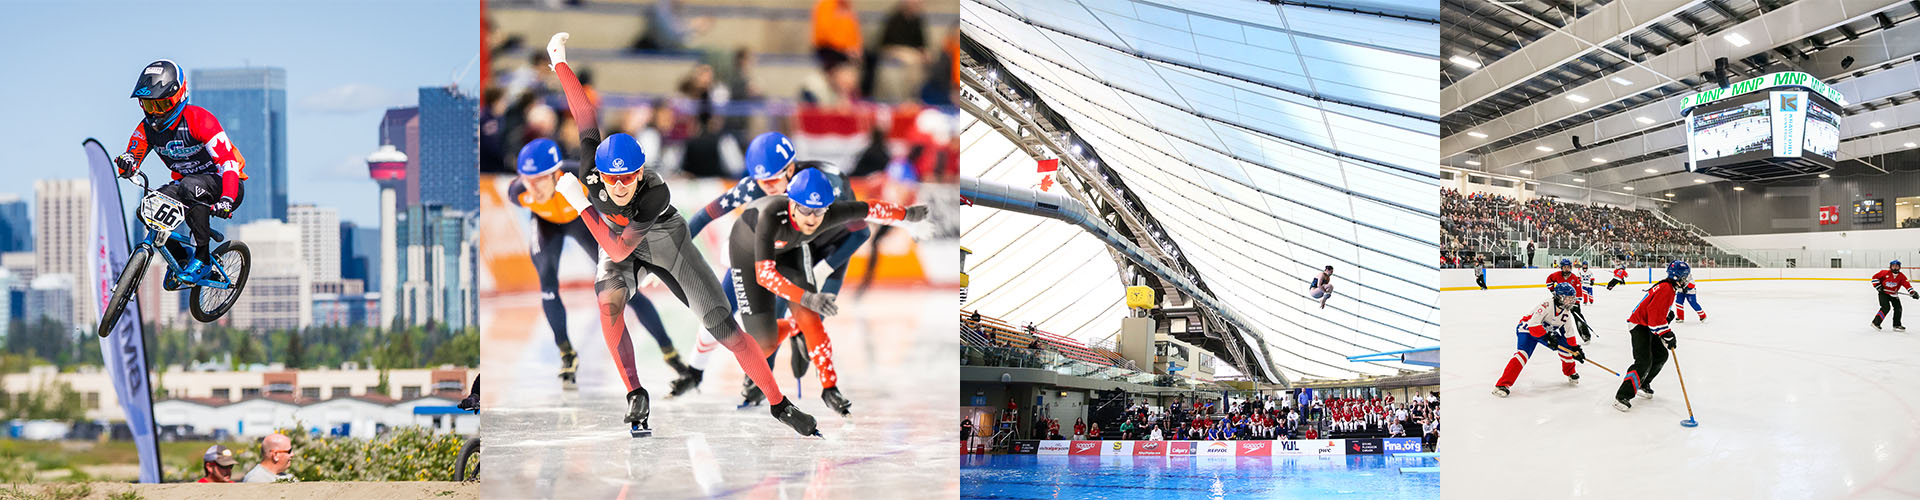 Compilation of major sporting events in Calgary